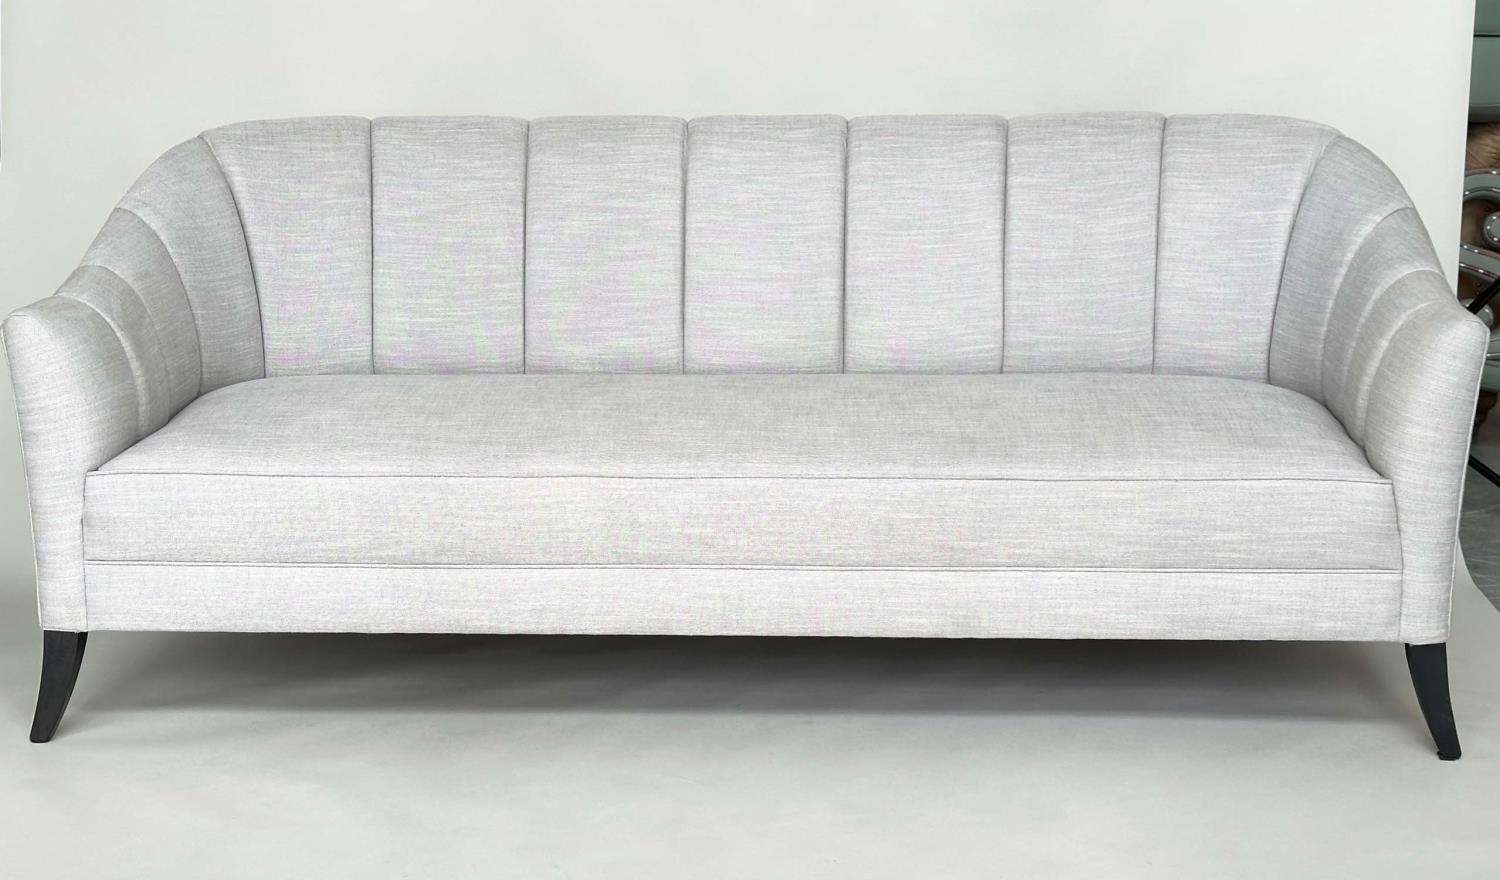 BRAY DESIGN SOFA, ribbed curved back and out swept supports, in Sahco Flint fabric upholstery, 210cm